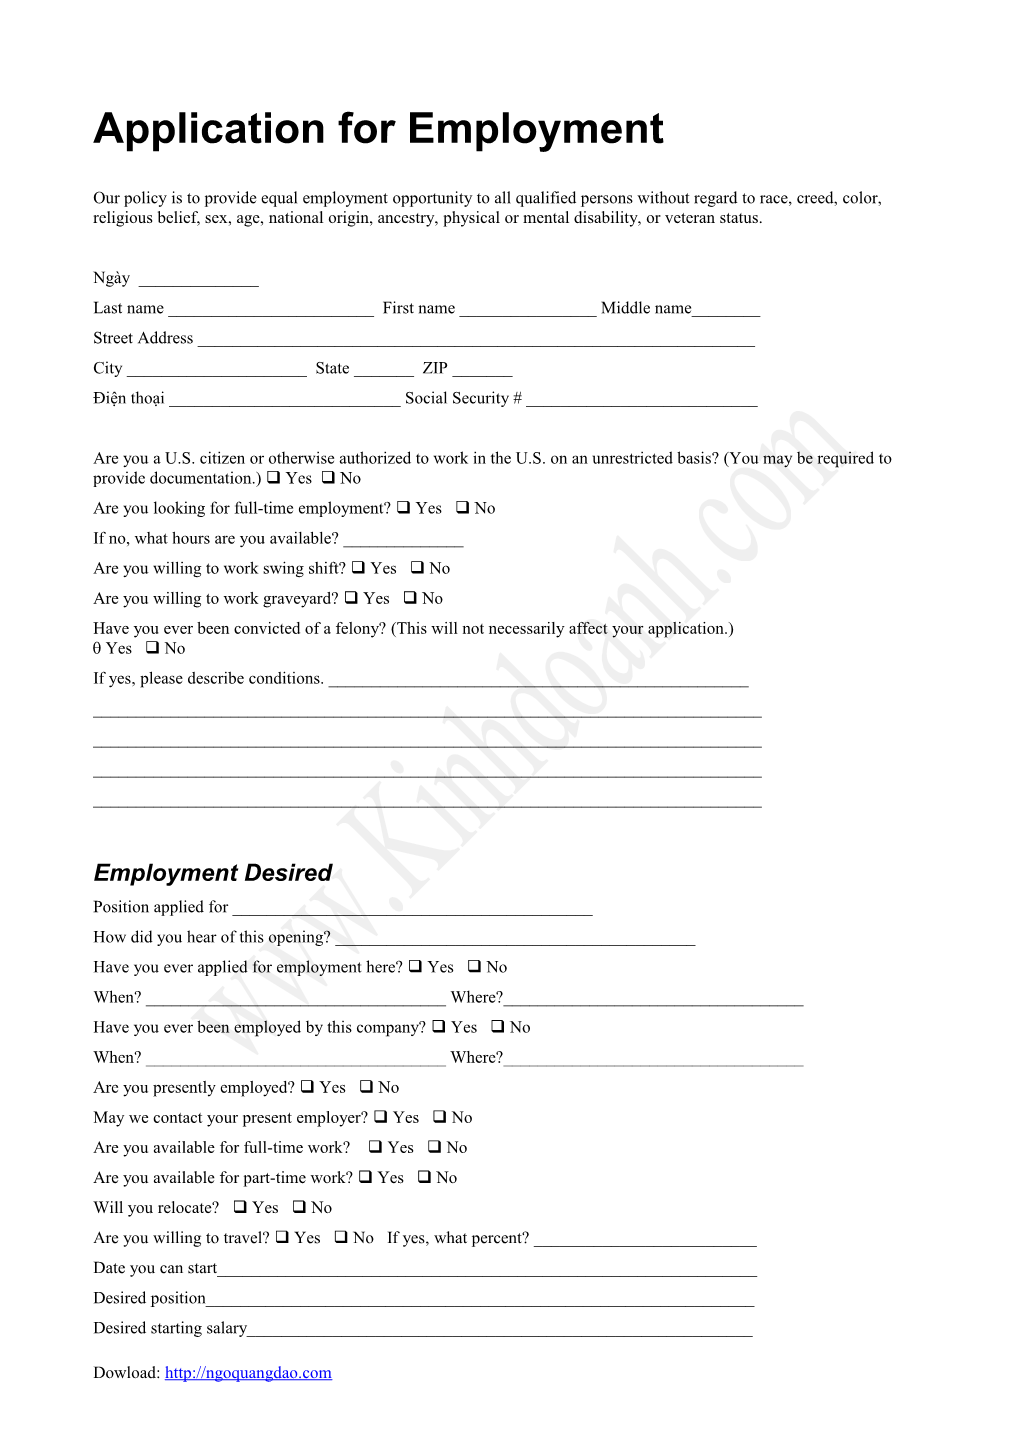 Application for Employment s93